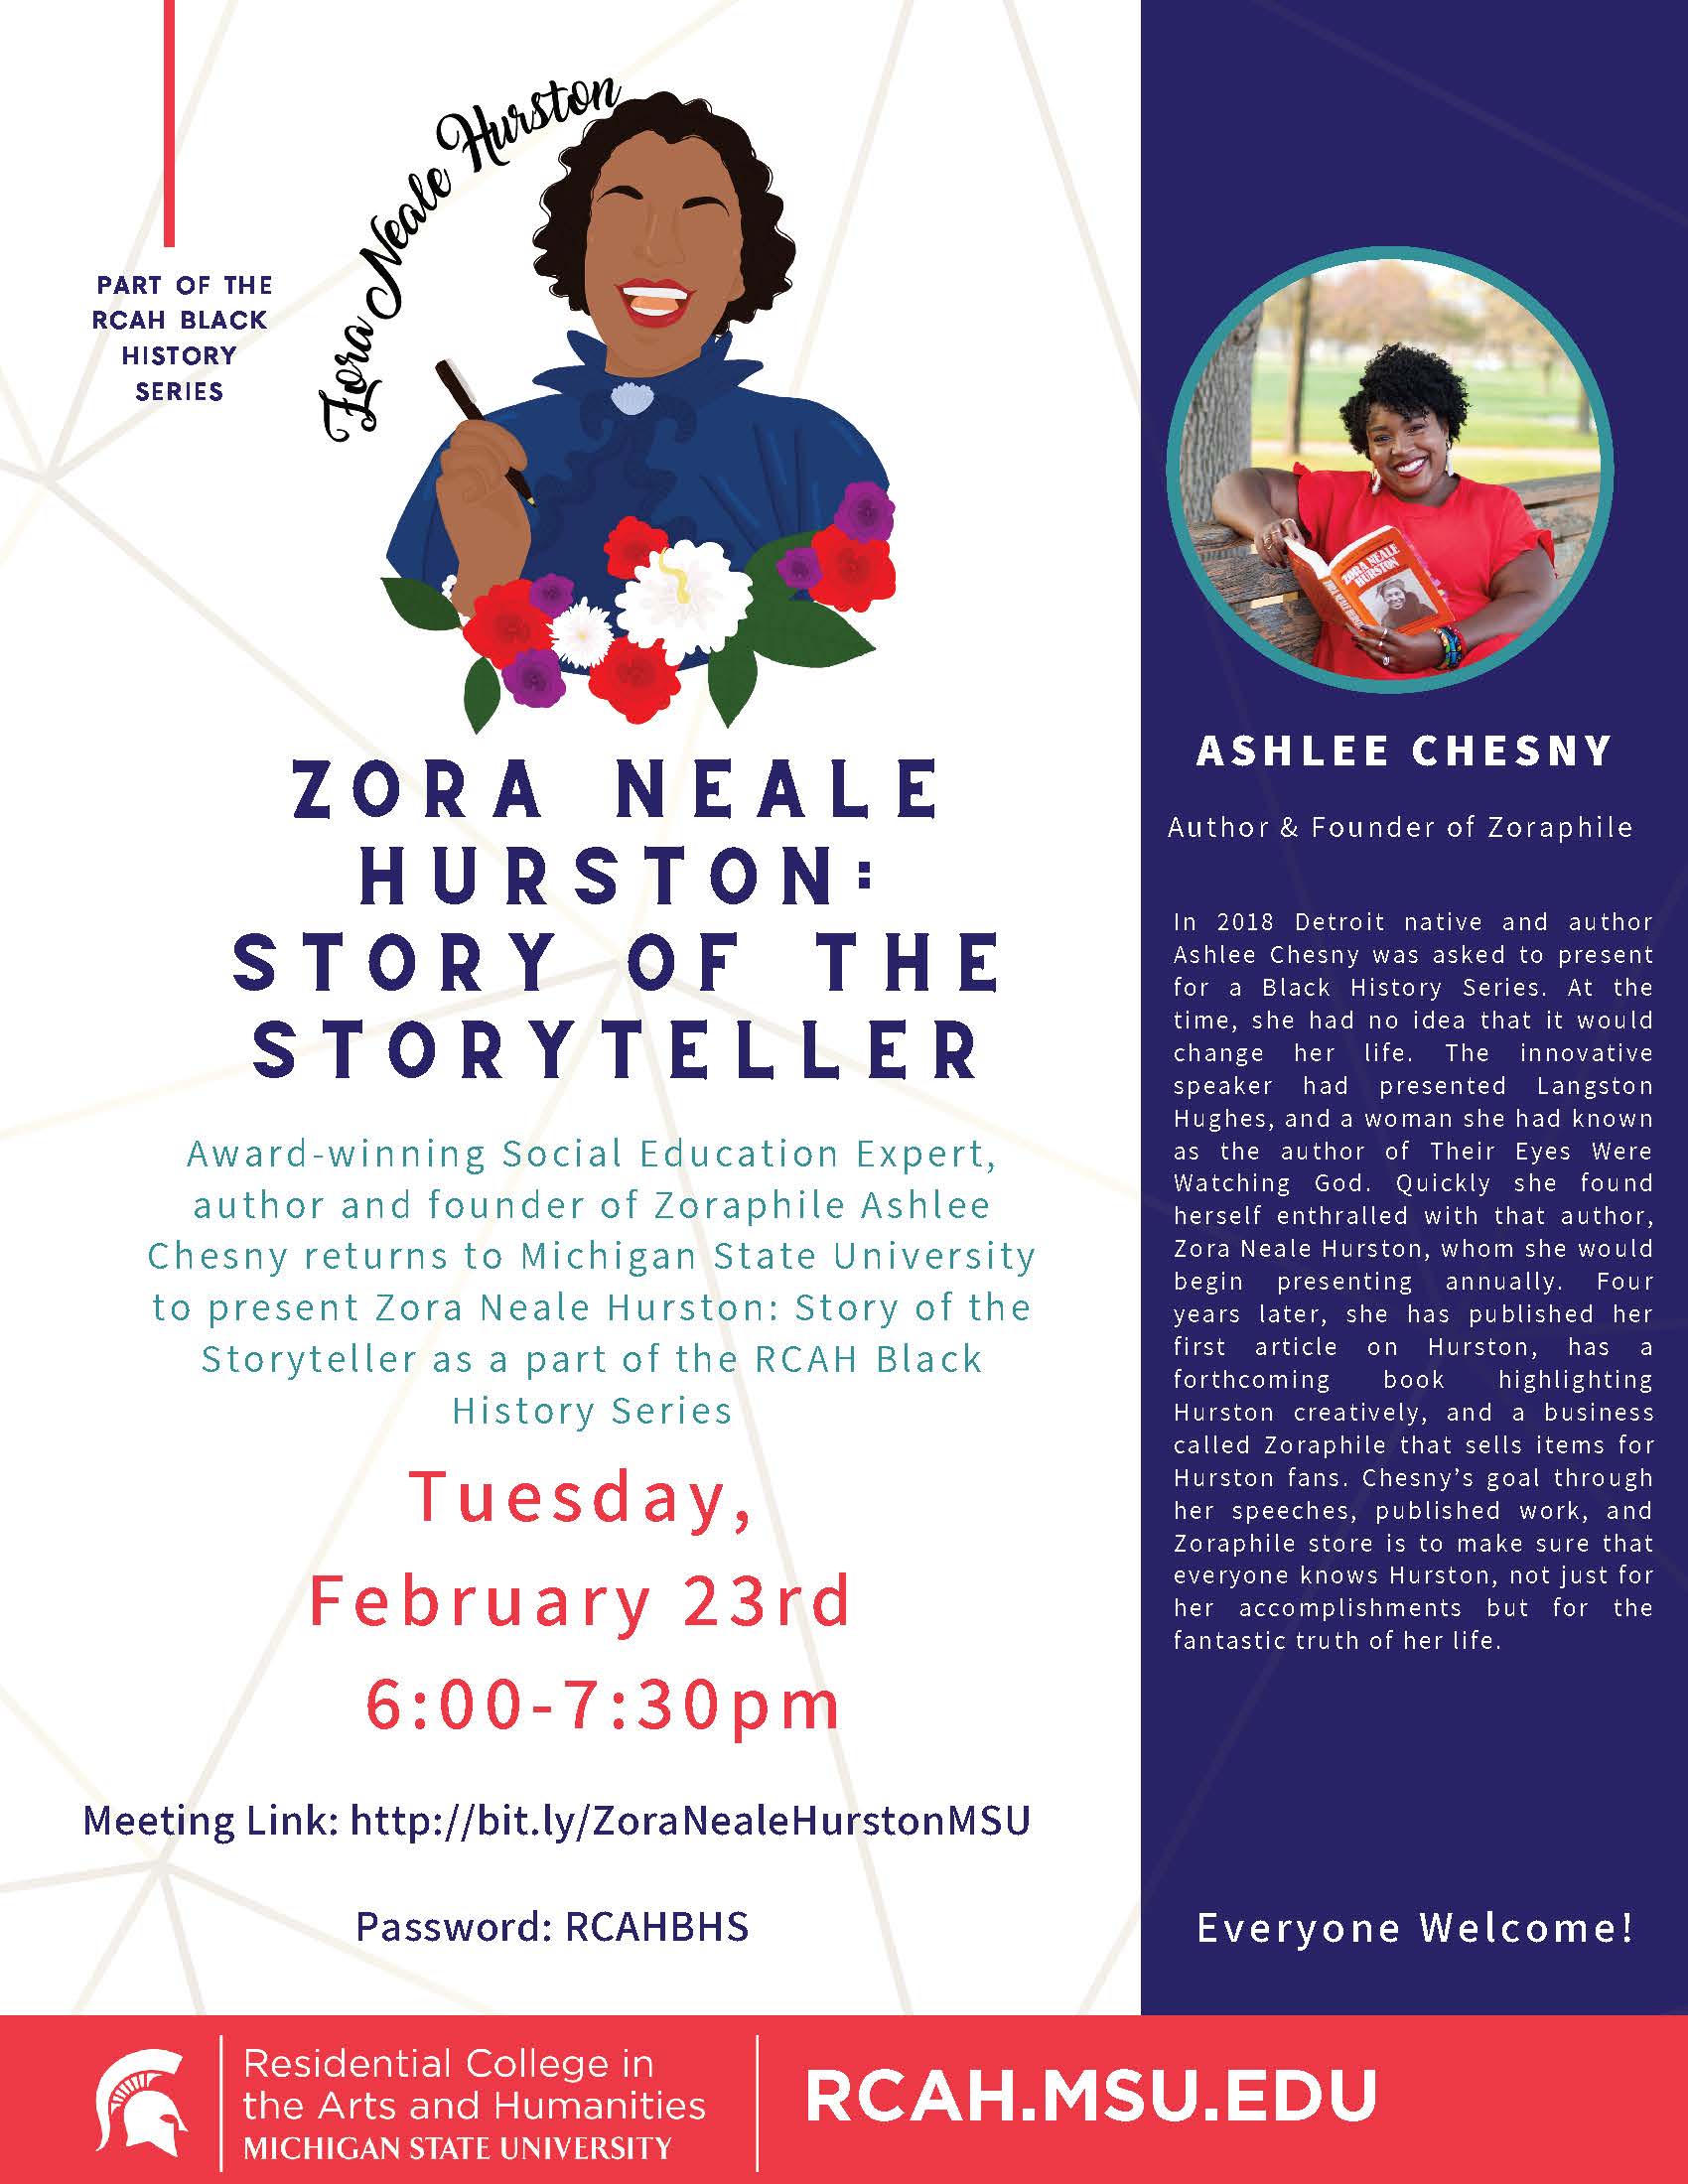 Image is a flyer for the Zora Neale Hurston event 